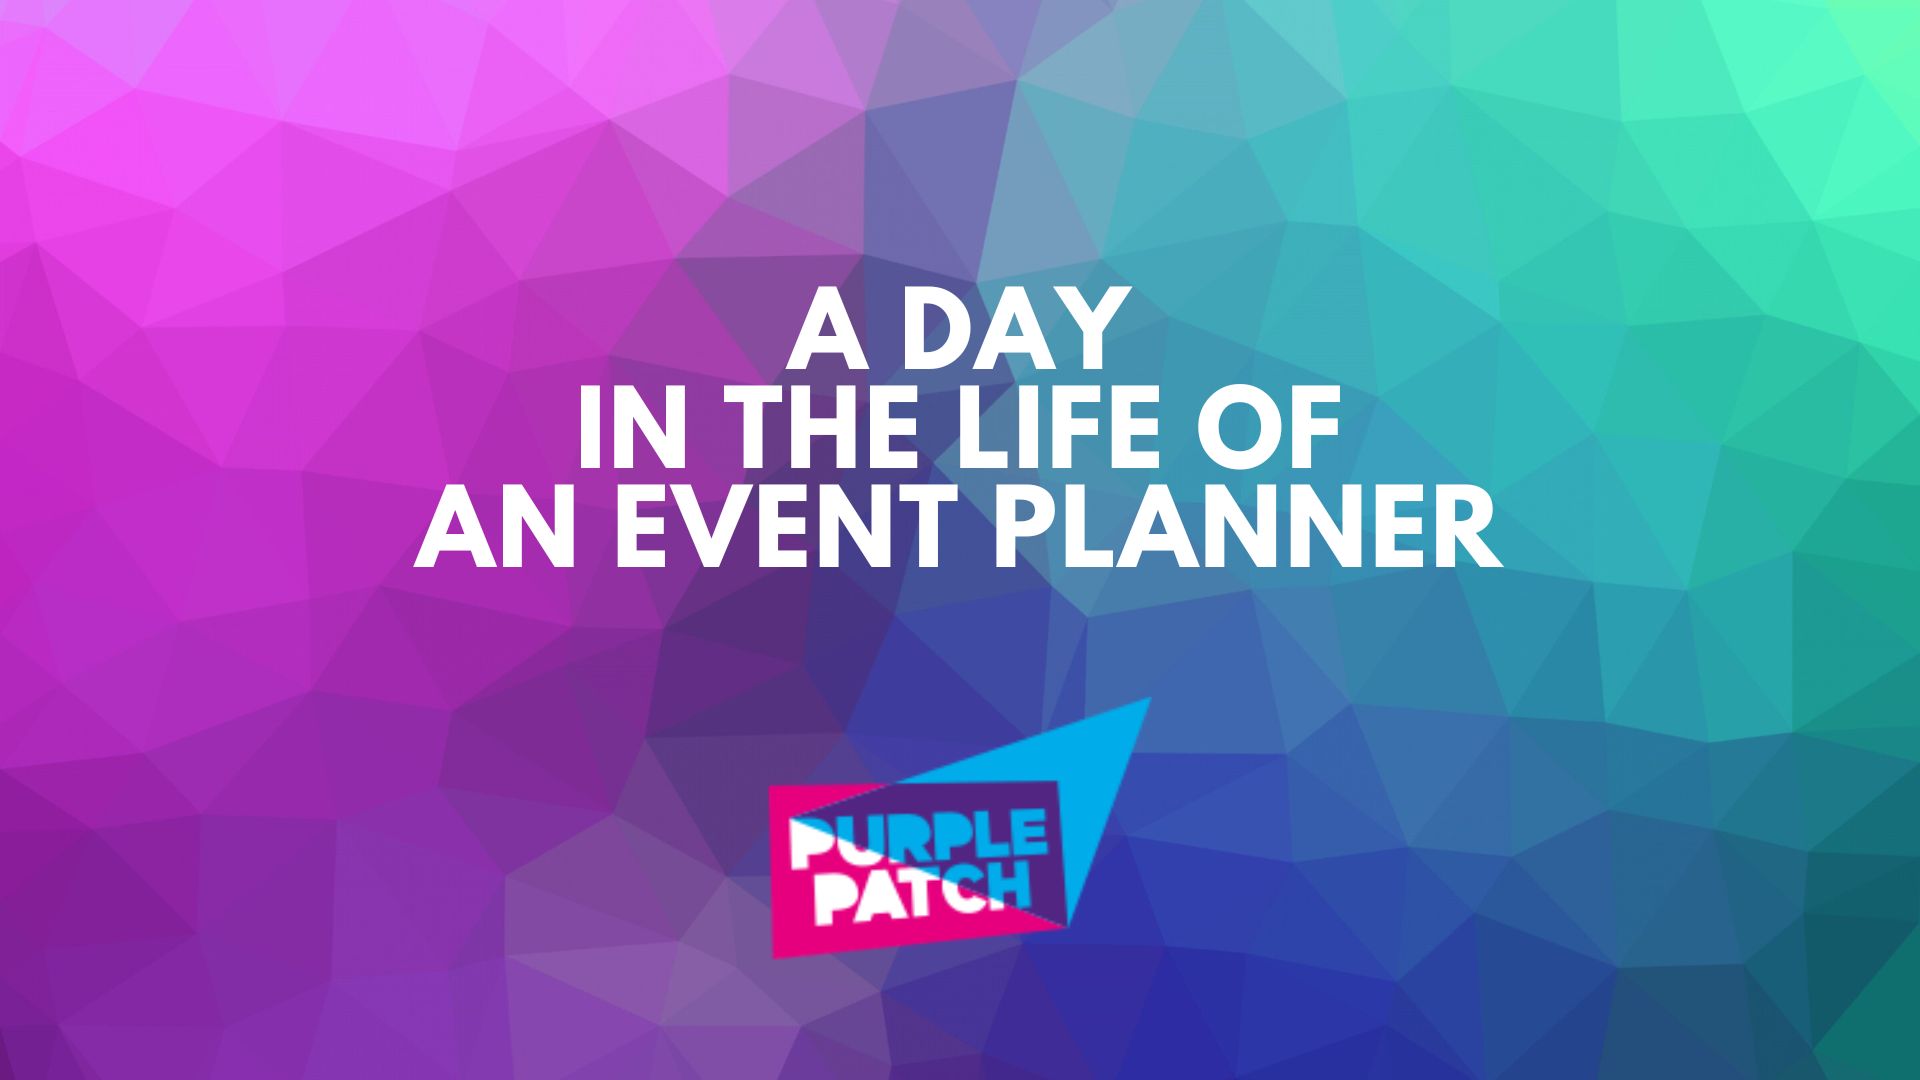 A Day in the Life of an Event Planner